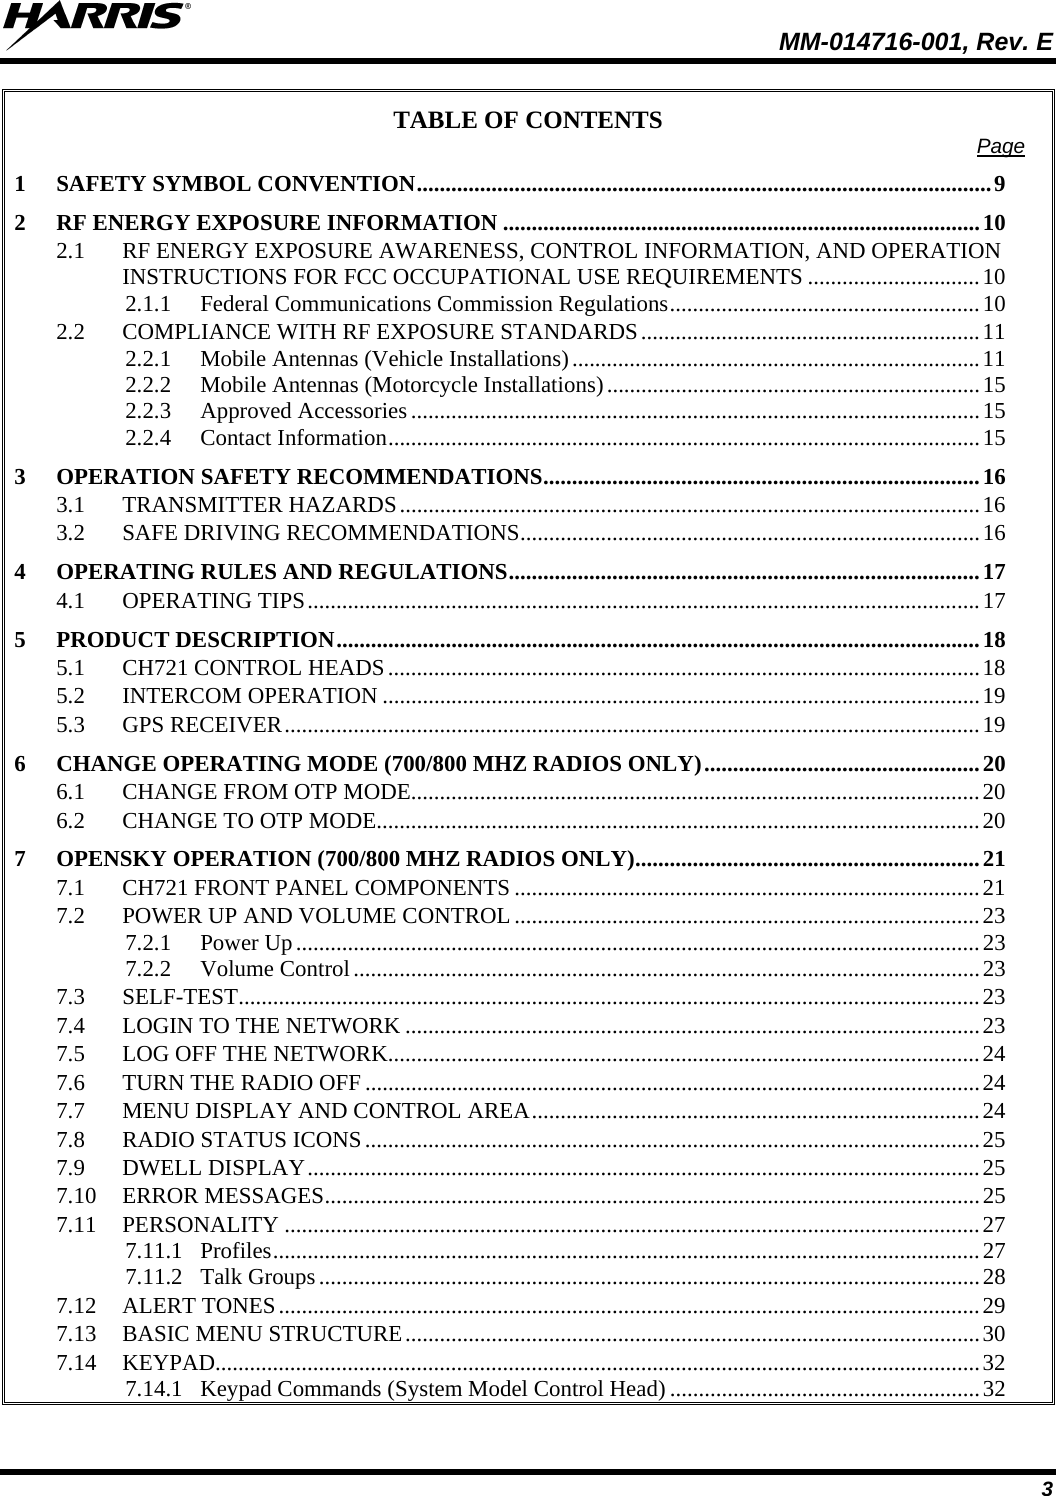  MM-014716-001, Rev. E 3 TABLE OF CONTENTS  Page 1 SAFETY SYMBOL CONVENTION....................................................................................................9 2 RF ENERGY EXPOSURE INFORMATION ...................................................................................10 2.1 RF ENERGY EXPOSURE AWARENESS, CONTROL INFORMATION, AND OPERATION INSTRUCTIONS FOR FCC OCCUPATIONAL USE REQUIREMENTS ..............................10 2.1.1 Federal Communications Commission Regulations......................................................10 2.2 COMPLIANCE WITH RF EXPOSURE STANDARDS...........................................................11 2.2.1 Mobile Antennas (Vehicle Installations).......................................................................11 2.2.2 Mobile Antennas (Motorcycle Installations).................................................................15 2.2.3 Approved Accessories ...................................................................................................15 2.2.4 Contact Information.......................................................................................................15 3 OPERATION SAFETY RECOMMENDATIONS............................................................................16 3.1 TRANSMITTER HAZARDS.....................................................................................................16 3.2 SAFE DRIVING RECOMMENDATIONS................................................................................16 4 OPERATING RULES AND REGULATIONS..................................................................................17 4.1 OPERATING TIPS.....................................................................................................................17 5 PRODUCT DESCRIPTION................................................................................................................18 5.1 CH721 CONTROL HEADS.......................................................................................................18 5.2 INTERCOM OPERATION ........................................................................................................19 5.3 GPS RECEIVER.........................................................................................................................19 6 CHANGE OPERATING MODE (700/800 MHZ RADIOS ONLY)................................................20 6.1 CHANGE FROM OTP MODE...................................................................................................20 6.2 CHANGE TO OTP MODE.........................................................................................................20 7 OPENSKY OPERATION (700/800 MHZ RADIOS ONLY)............................................................21 7.1 CH721 FRONT PANEL COMPONENTS .................................................................................21 7.2 POWER UP AND VOLUME CONTROL .................................................................................23 7.2.1 Power Up.......................................................................................................................23 7.2.2 Volume Control.............................................................................................................23 7.3 SELF-TEST.................................................................................................................................23 7.4 LOGIN TO THE NETWORK ....................................................................................................23 7.5 LOG OFF THE NETWORK.......................................................................................................24 7.6 TURN THE RADIO OFF ...........................................................................................................24 7.7 MENU DISPLAY AND CONTROL AREA..............................................................................24 7.8 RADIO STATUS ICONS...........................................................................................................25 7.9 DWELL DISPLAY.....................................................................................................................25 7.10 ERROR MESSAGES..................................................................................................................25 7.11 PERSONALITY .........................................................................................................................27 7.11.1 Profiles...........................................................................................................................27 7.11.2 Talk Groups...................................................................................................................28 7.12 ALERT TONES..........................................................................................................................29 7.13 BASIC MENU STRUCTURE....................................................................................................30 7.14 KEYPAD.....................................................................................................................................32 7.14.1 Keypad Commands (System Model Control Head) ......................................................32 